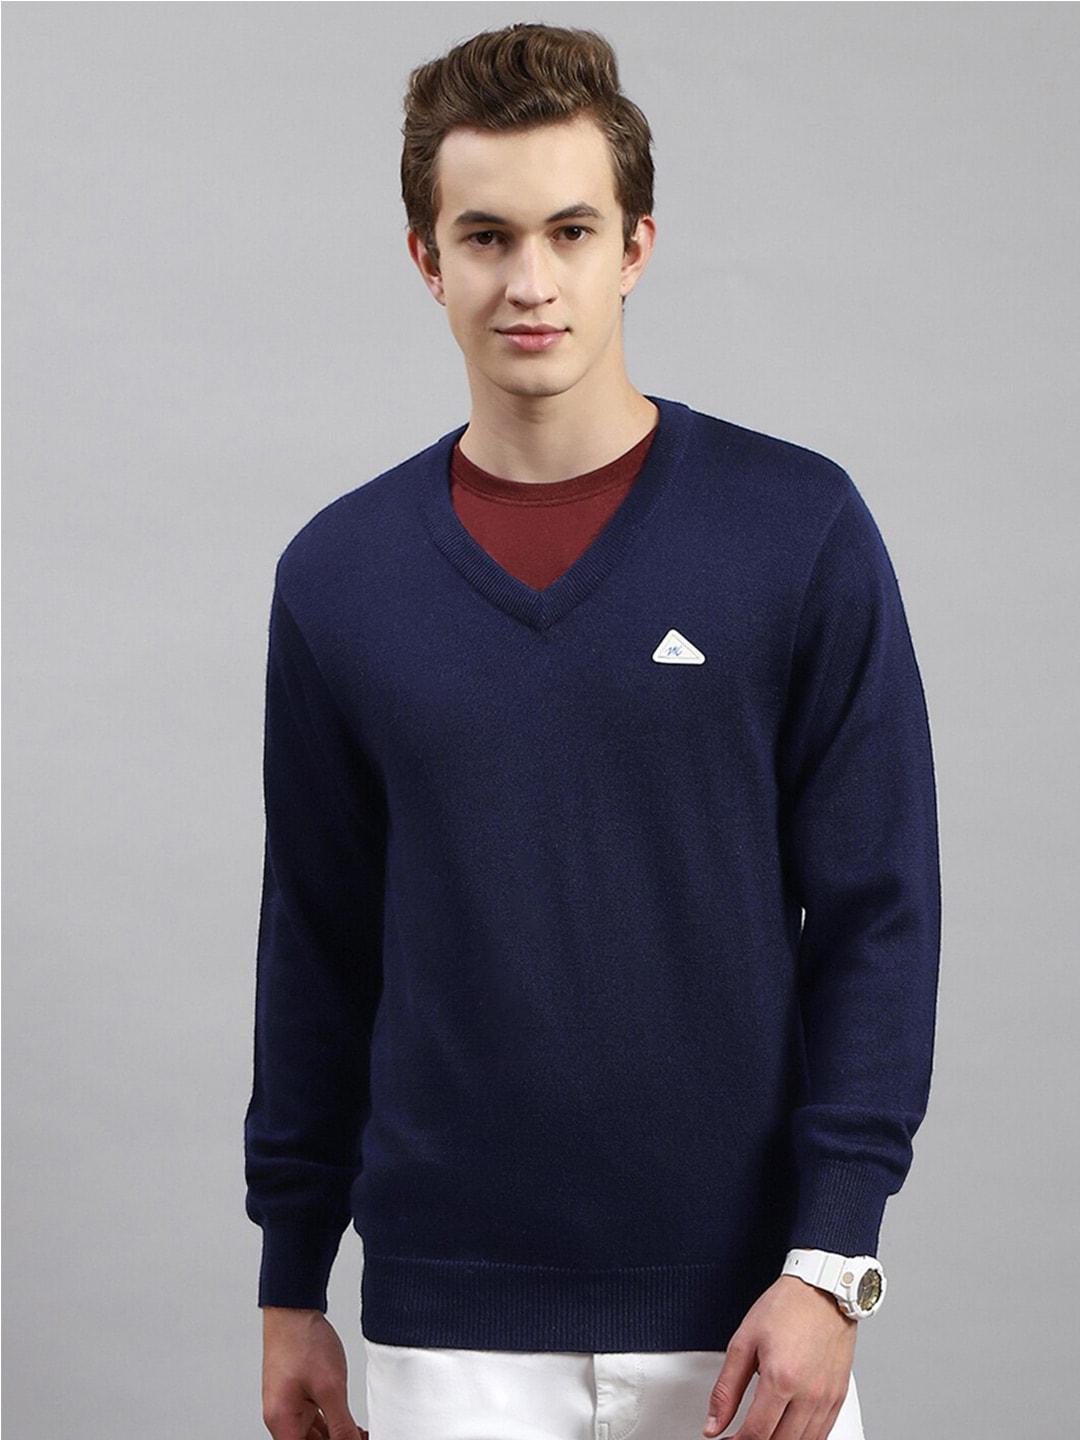 monte-carlo-v-neck-long-sleeves-woollen-pullover